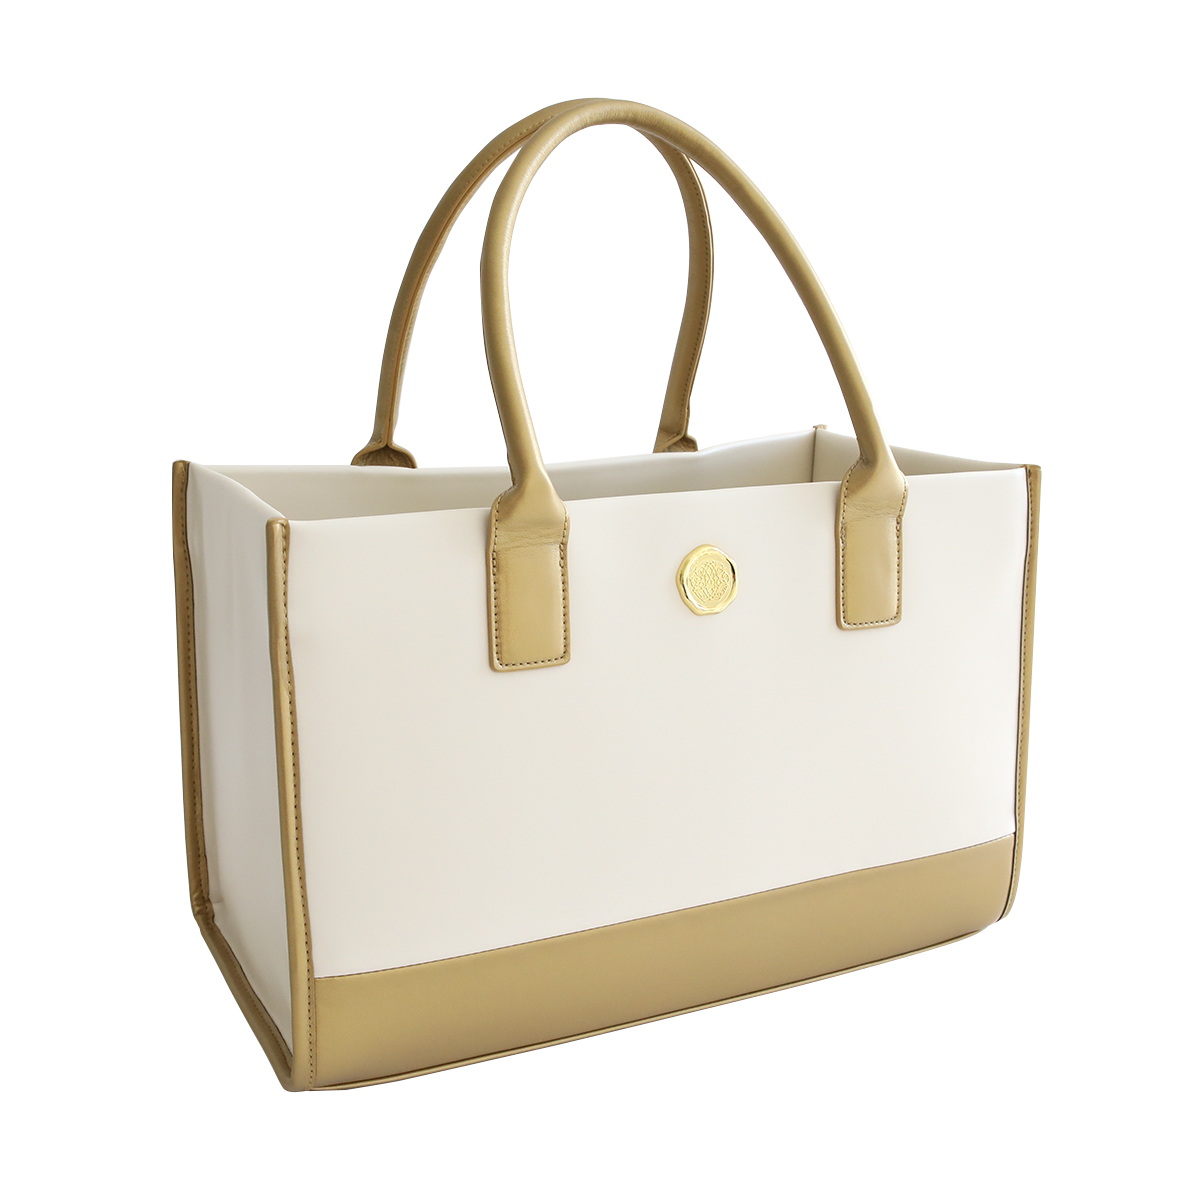 An elegant beige and tan Empress Machine Tote Bag with top handles and a circular logo on a white background.